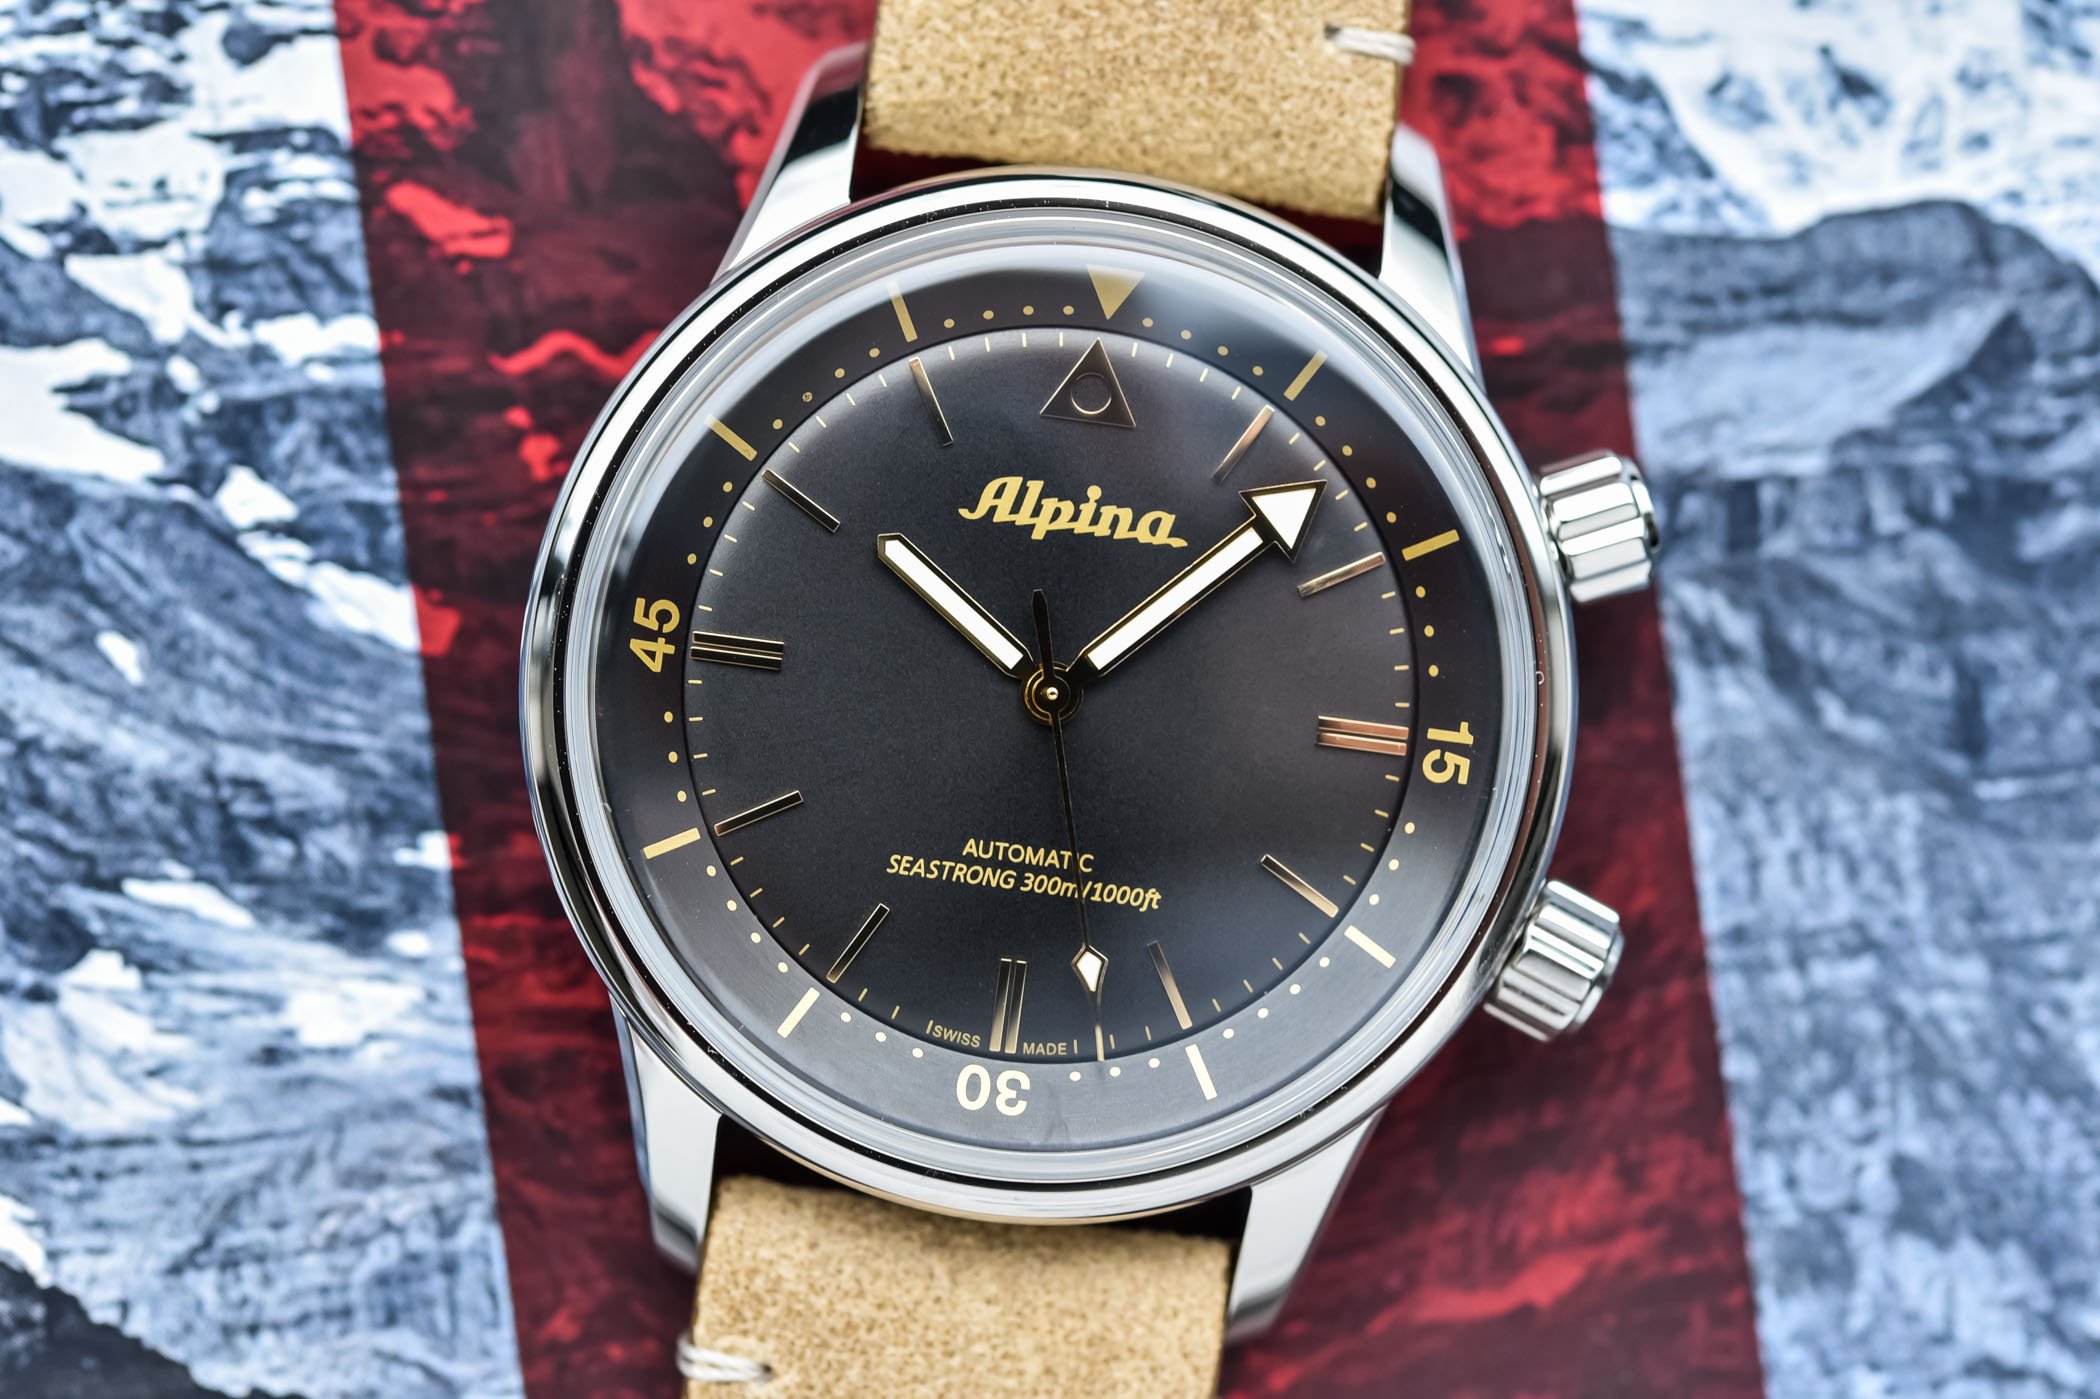 Alpina Seastrong Diver 300 Heritage 2021 Edition hands-on